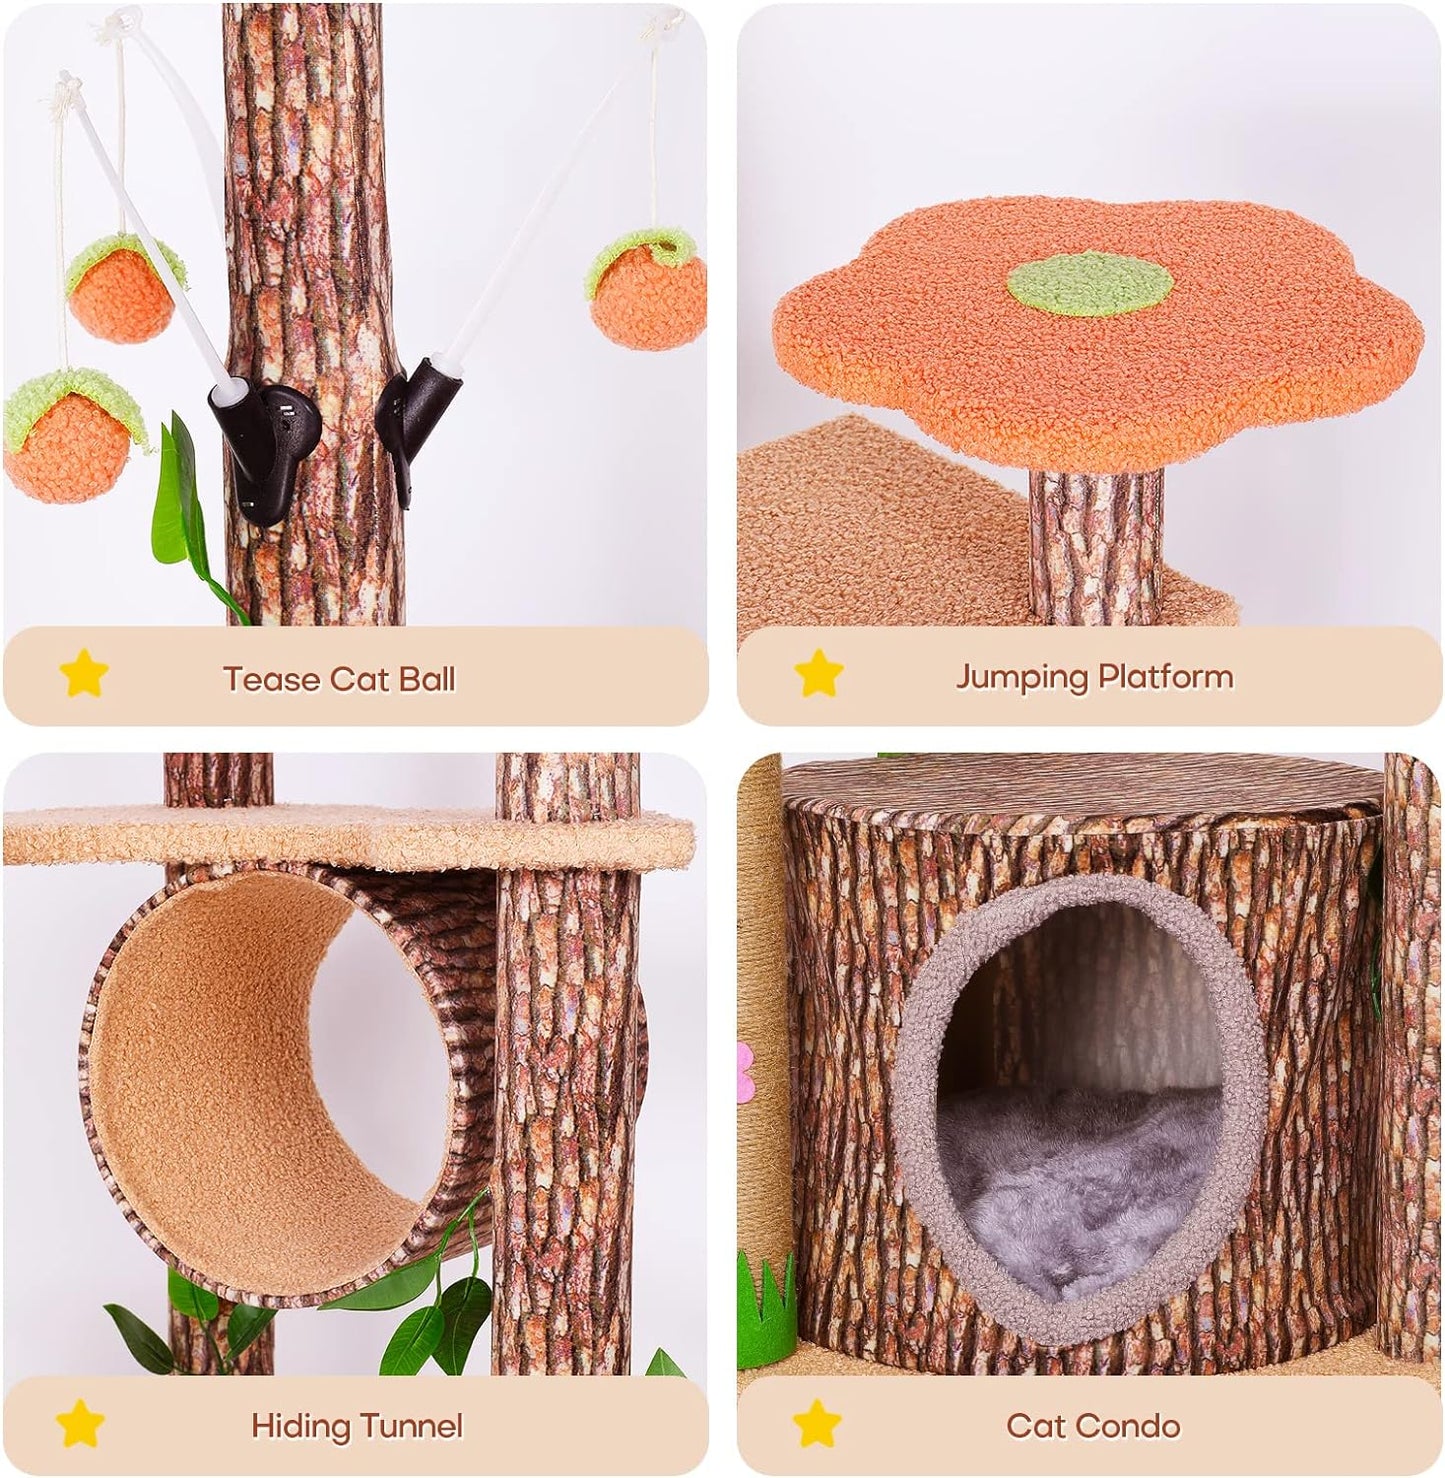 Lucky Monet 61" Cat Tree for Indoor Cats, Creative Tree-Like Cat Tower with Leaves, Unique Cat Climbing Frame with Scratching Post, Condo, Flower Platform